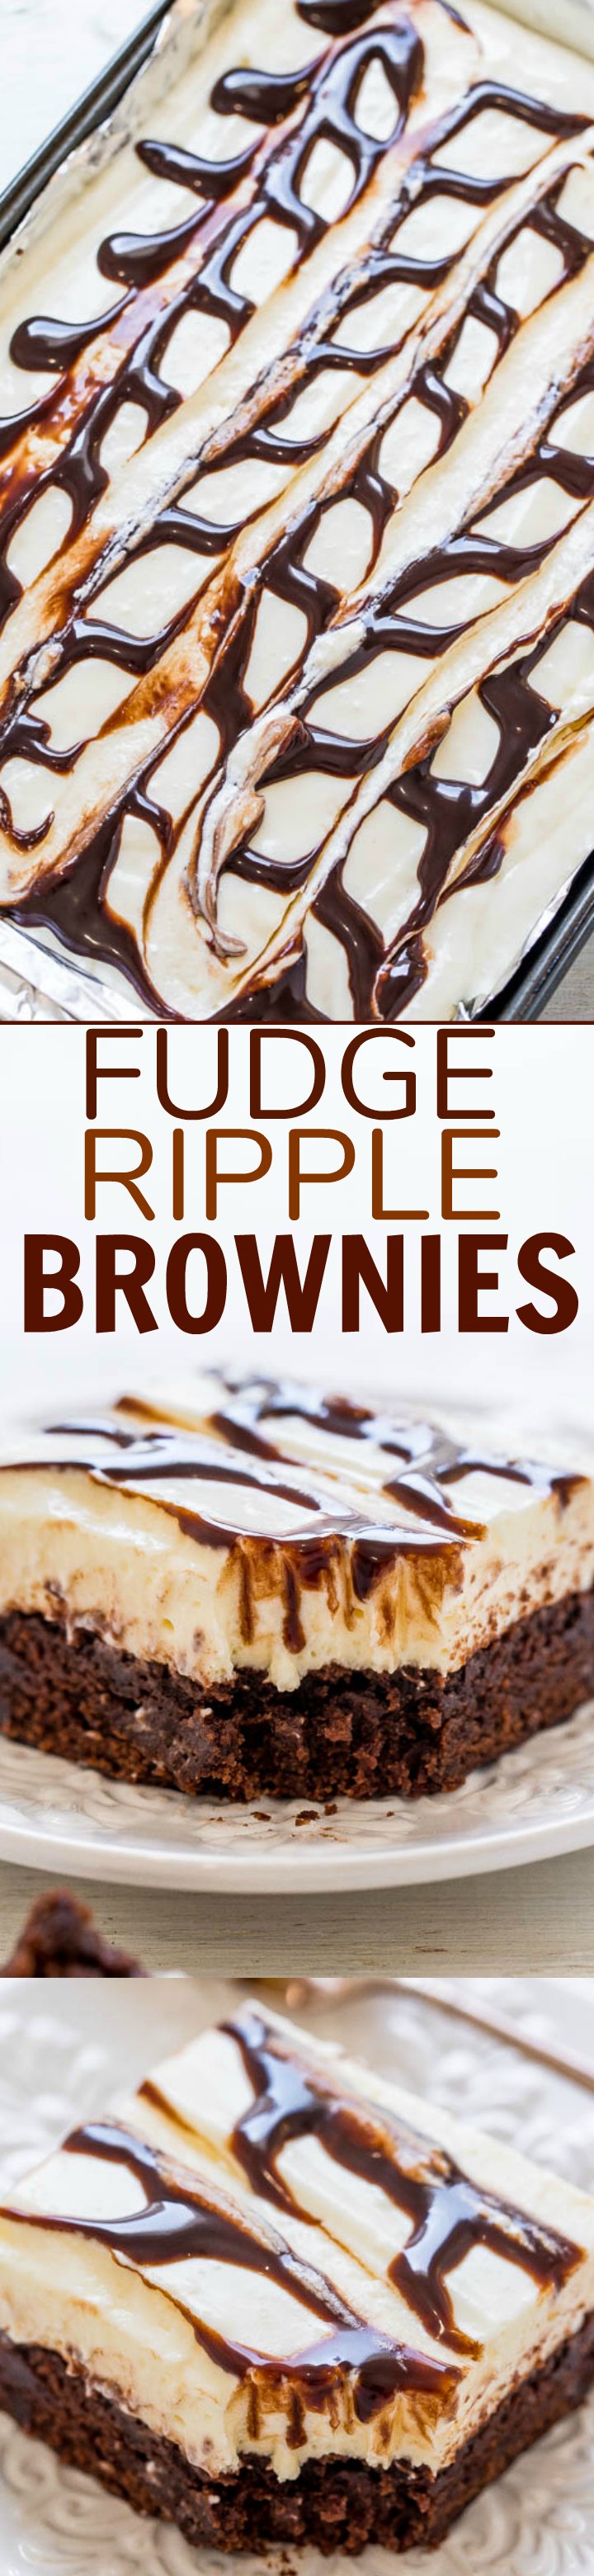 Fudge Brownies with Cream Cheese Frosting — Forget fudge ripple ice cream and try on of these EASY, decadent, and AMAZING brownies instead!! They're topped with a pudding-infused cream cheese frosting and chocolate sauce RIPPLES!!